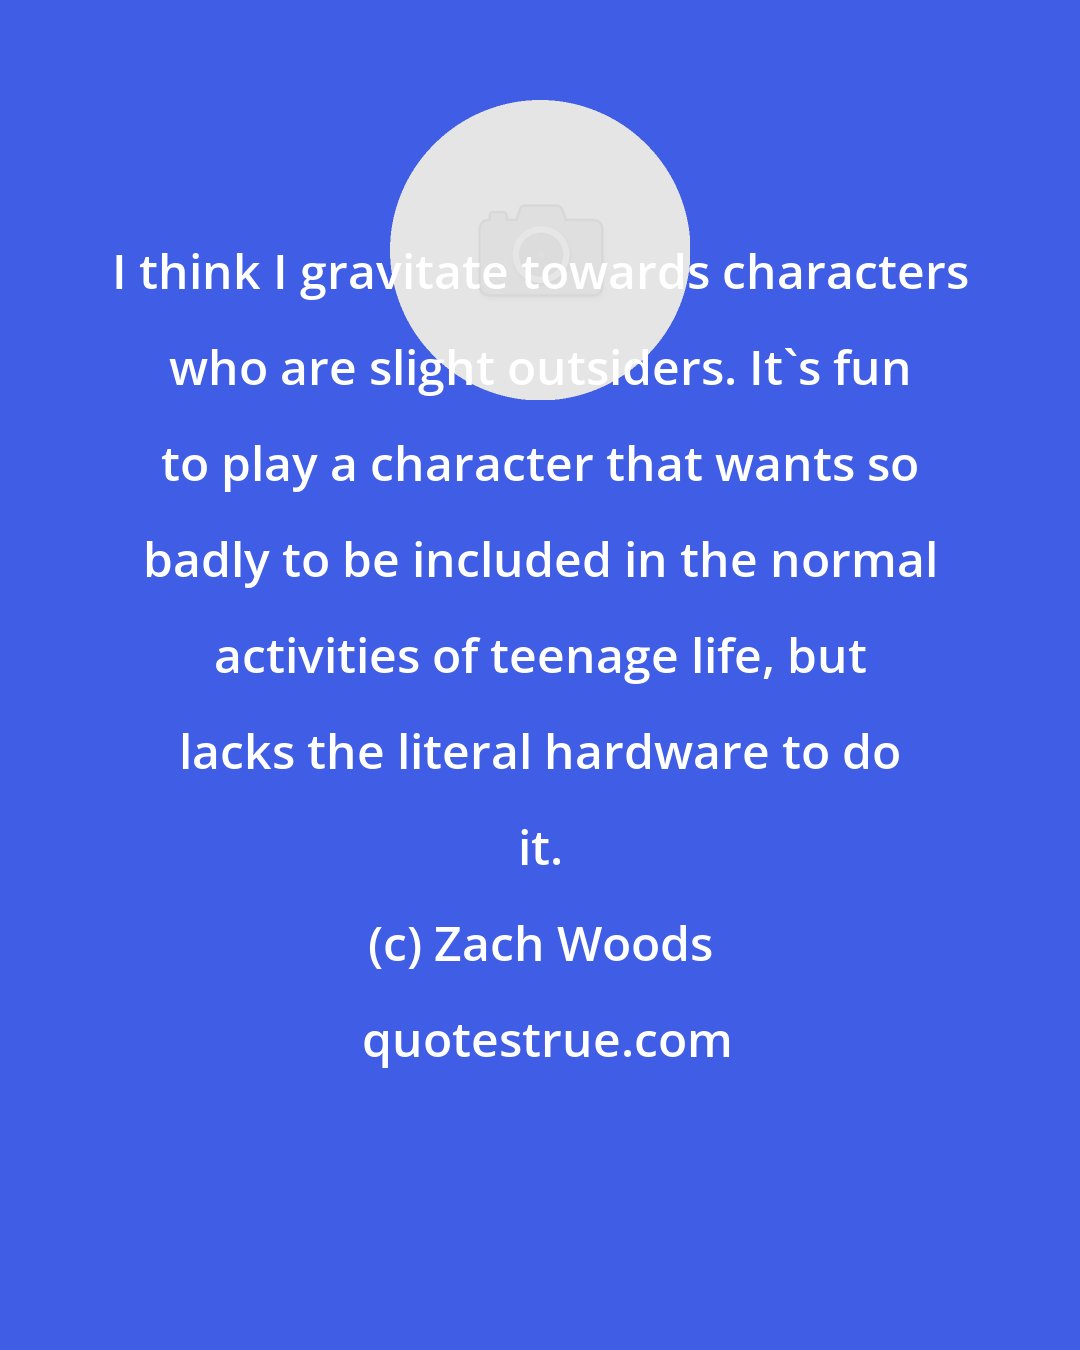 Zach Woods: I think I gravitate towards characters who are slight outsiders. It's fun to play a character that wants so badly to be included in the normal activities of teenage life, but lacks the literal hardware to do it.